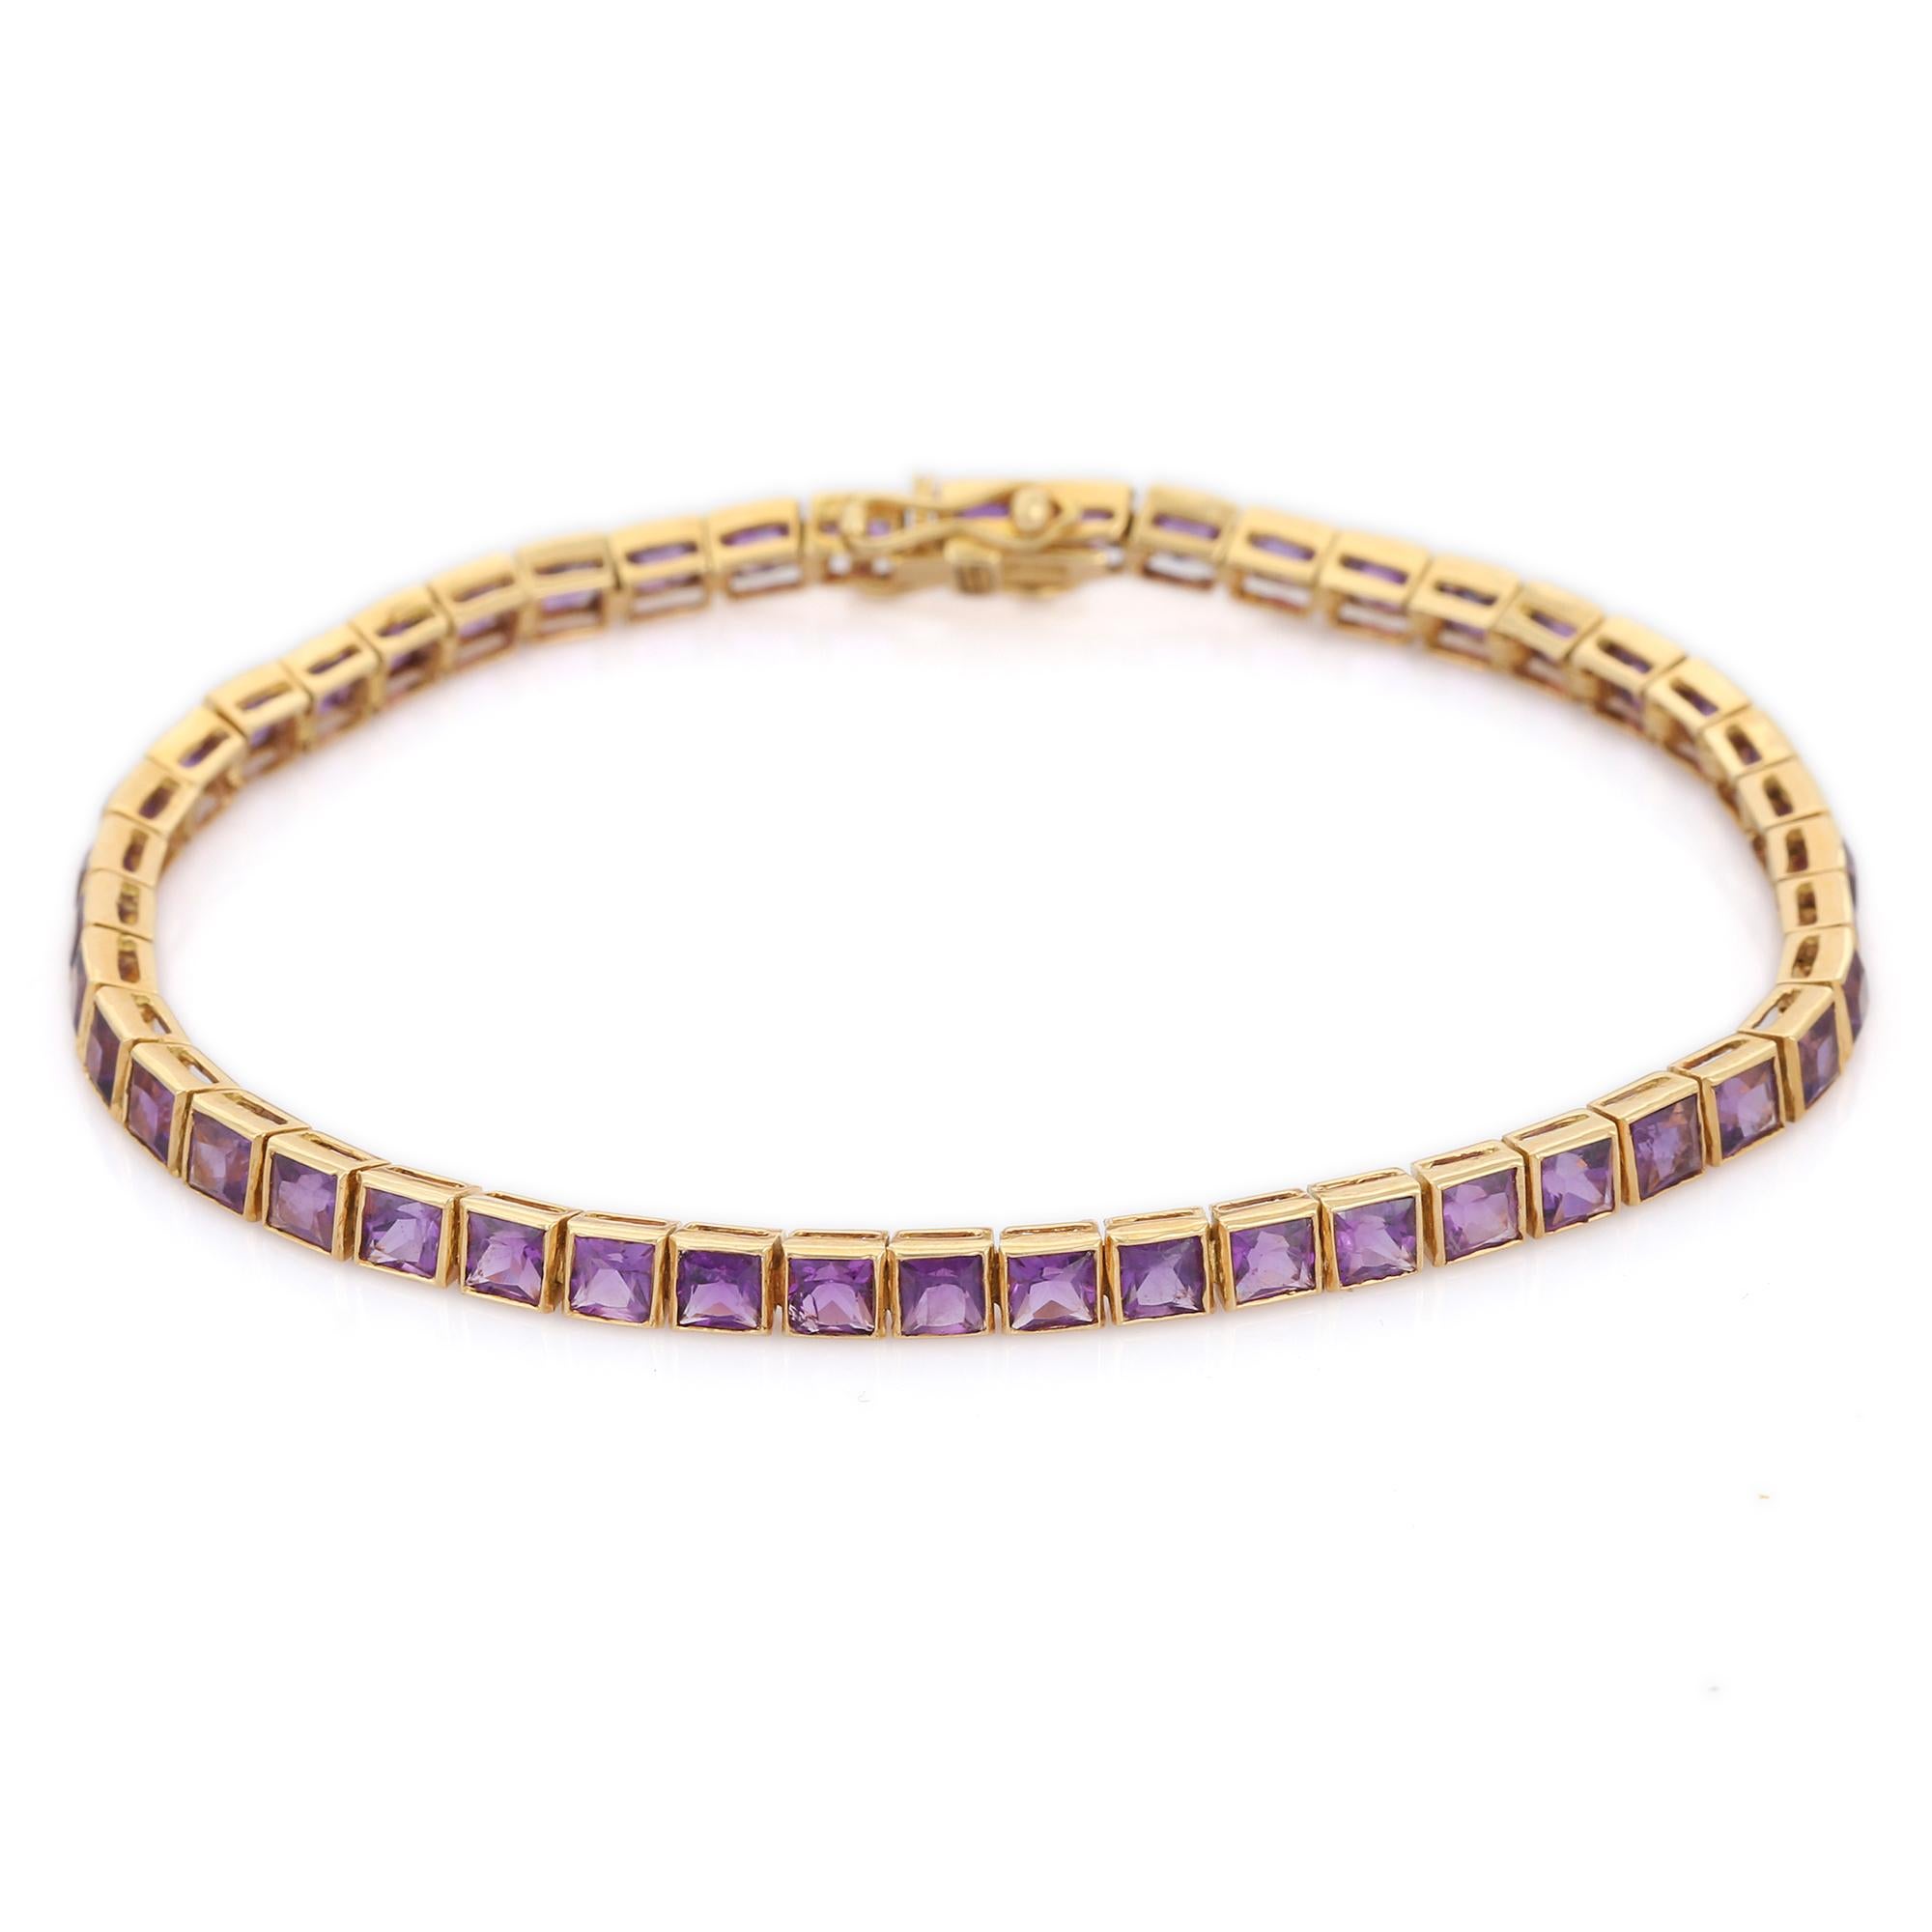 4.5 Carat Square Cut Amethyst Tennis Bracelet in 18K Yellow Gold In New Condition For Sale In Houston, TX